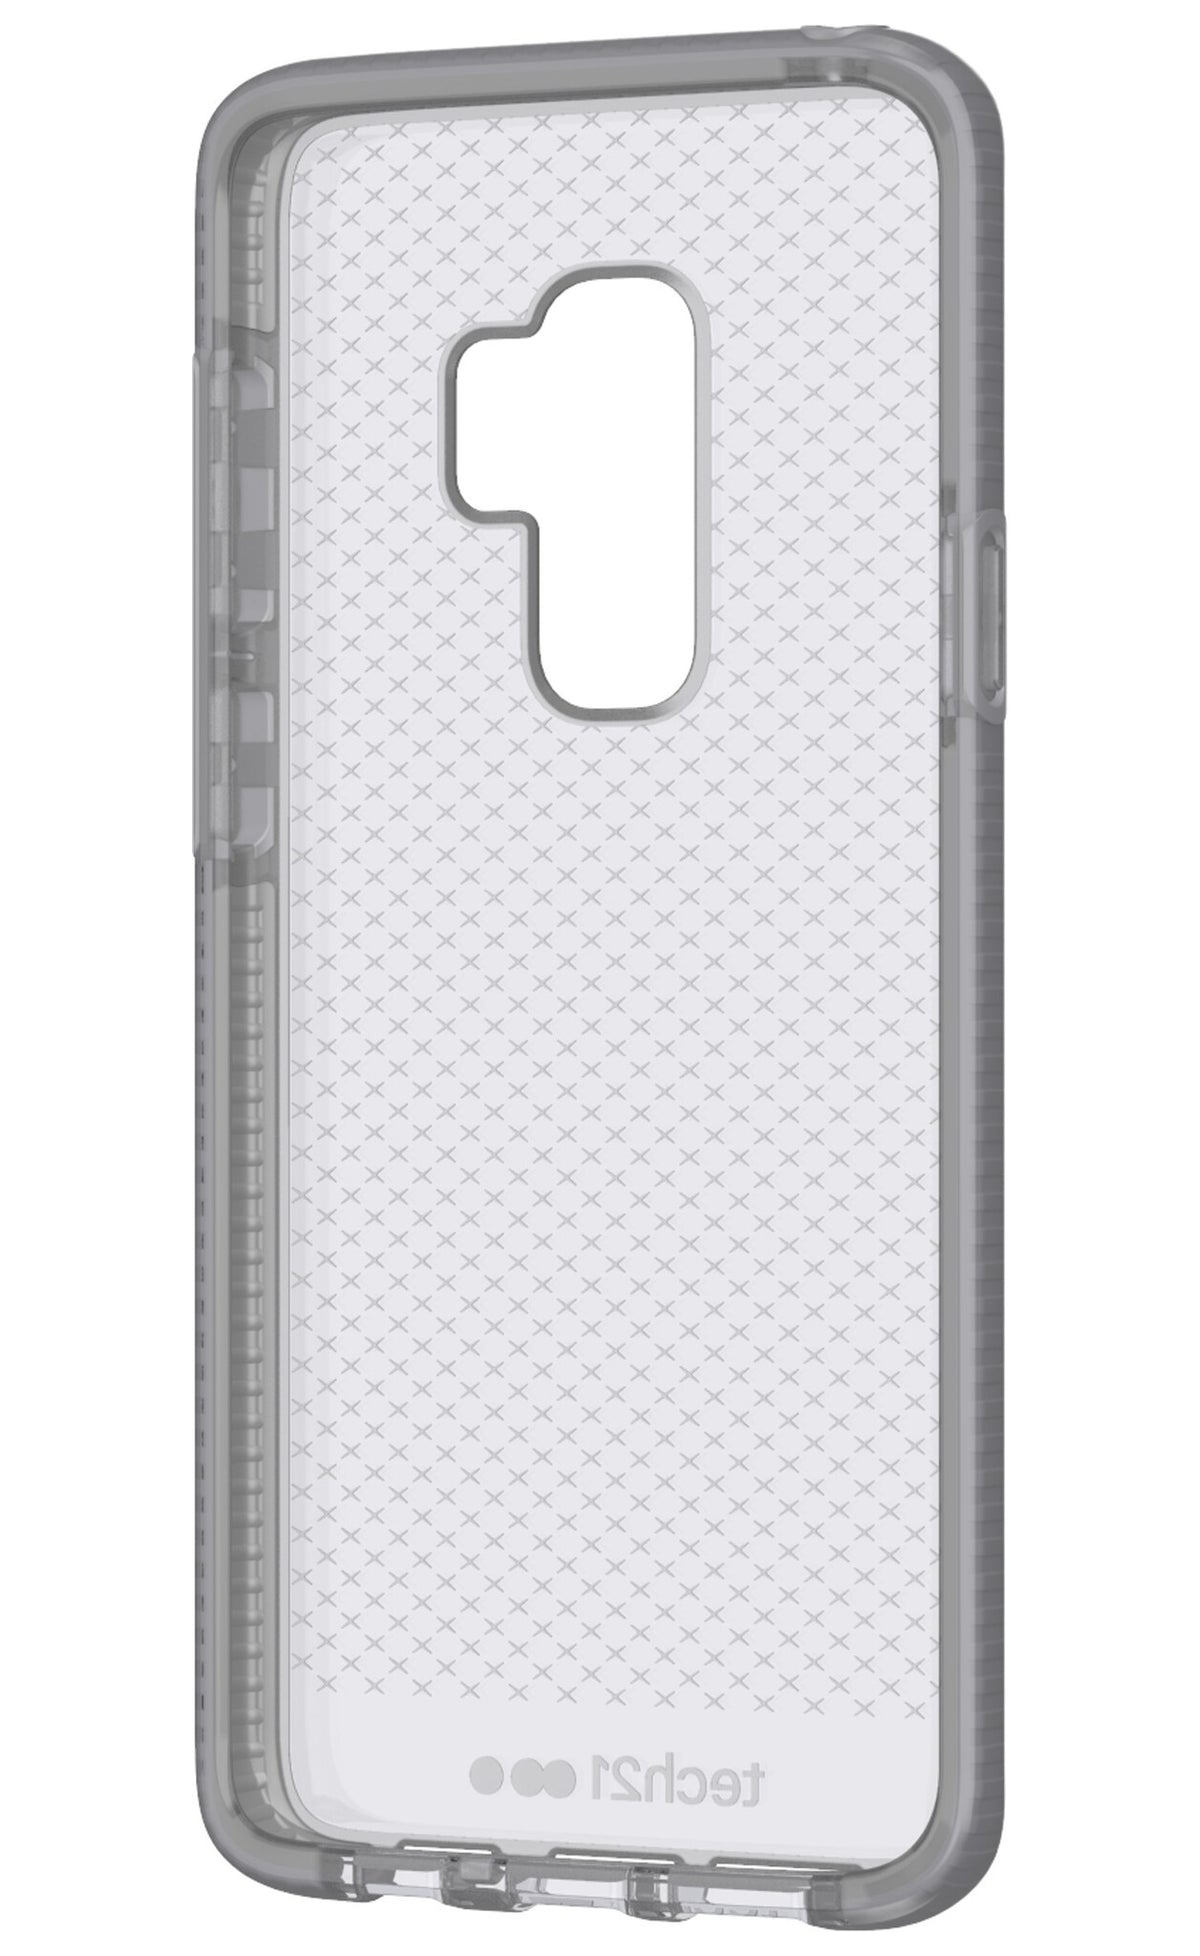 Tech21 Evo Check mobile phone case for Galaxy S9+ in Clear Grey